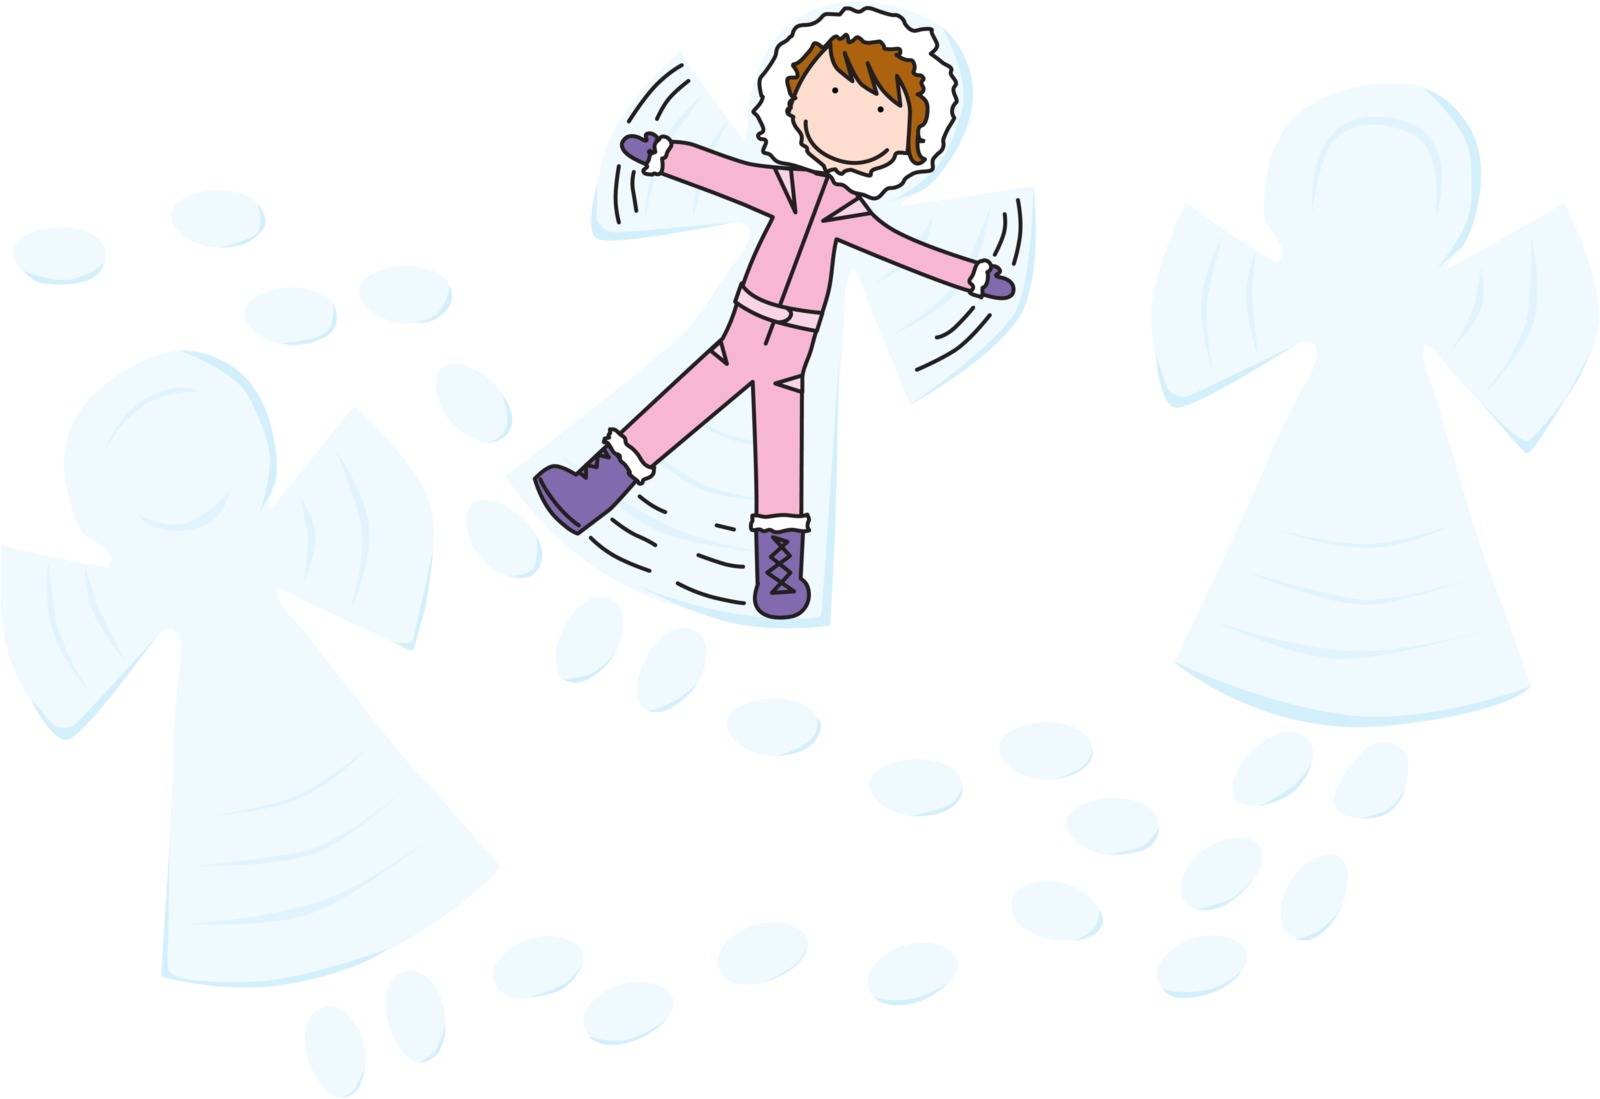 Illustration of a girl making angels in the snow